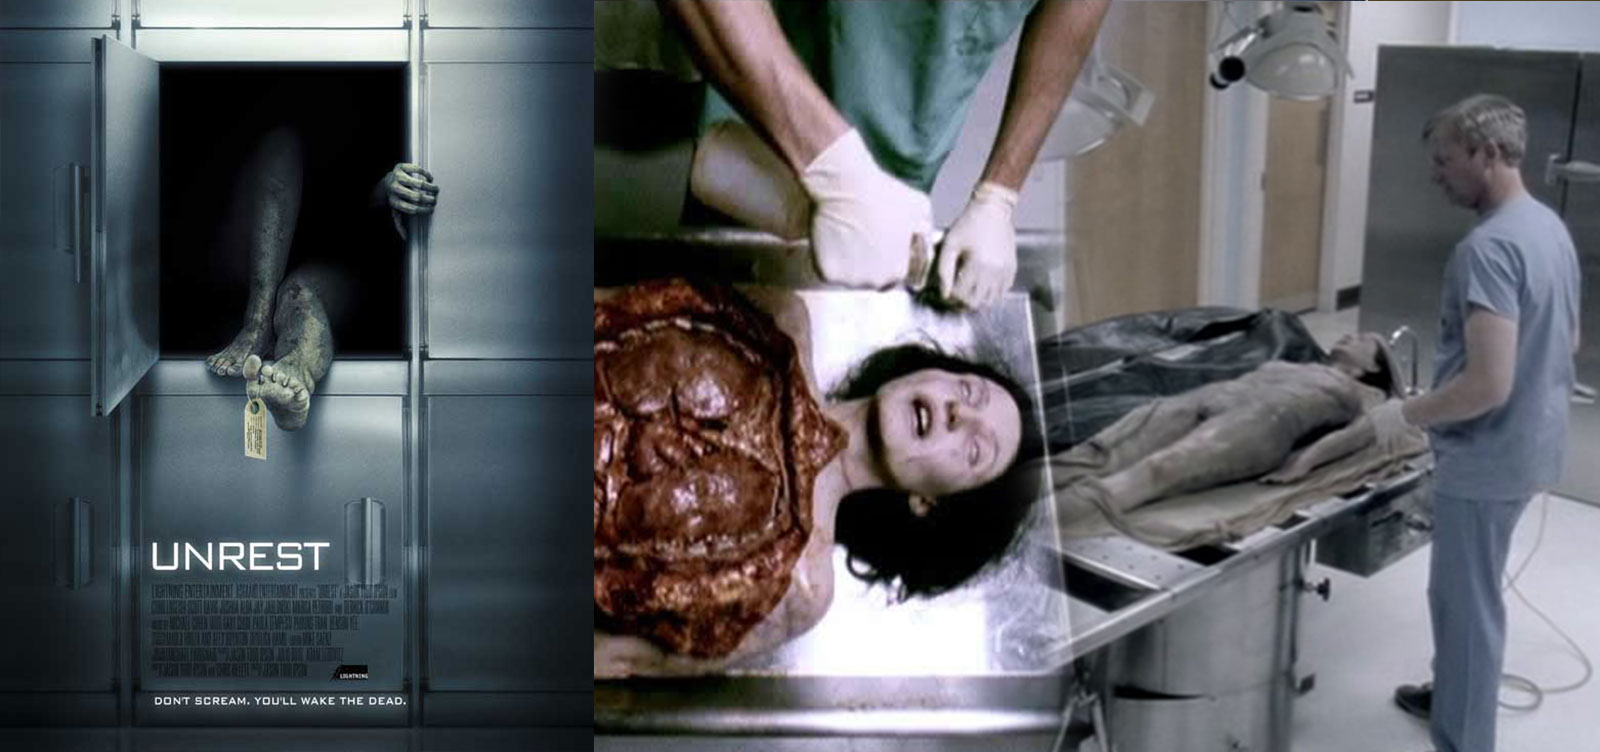 Films That Used Real Bodies - Horror Land - Horror. 